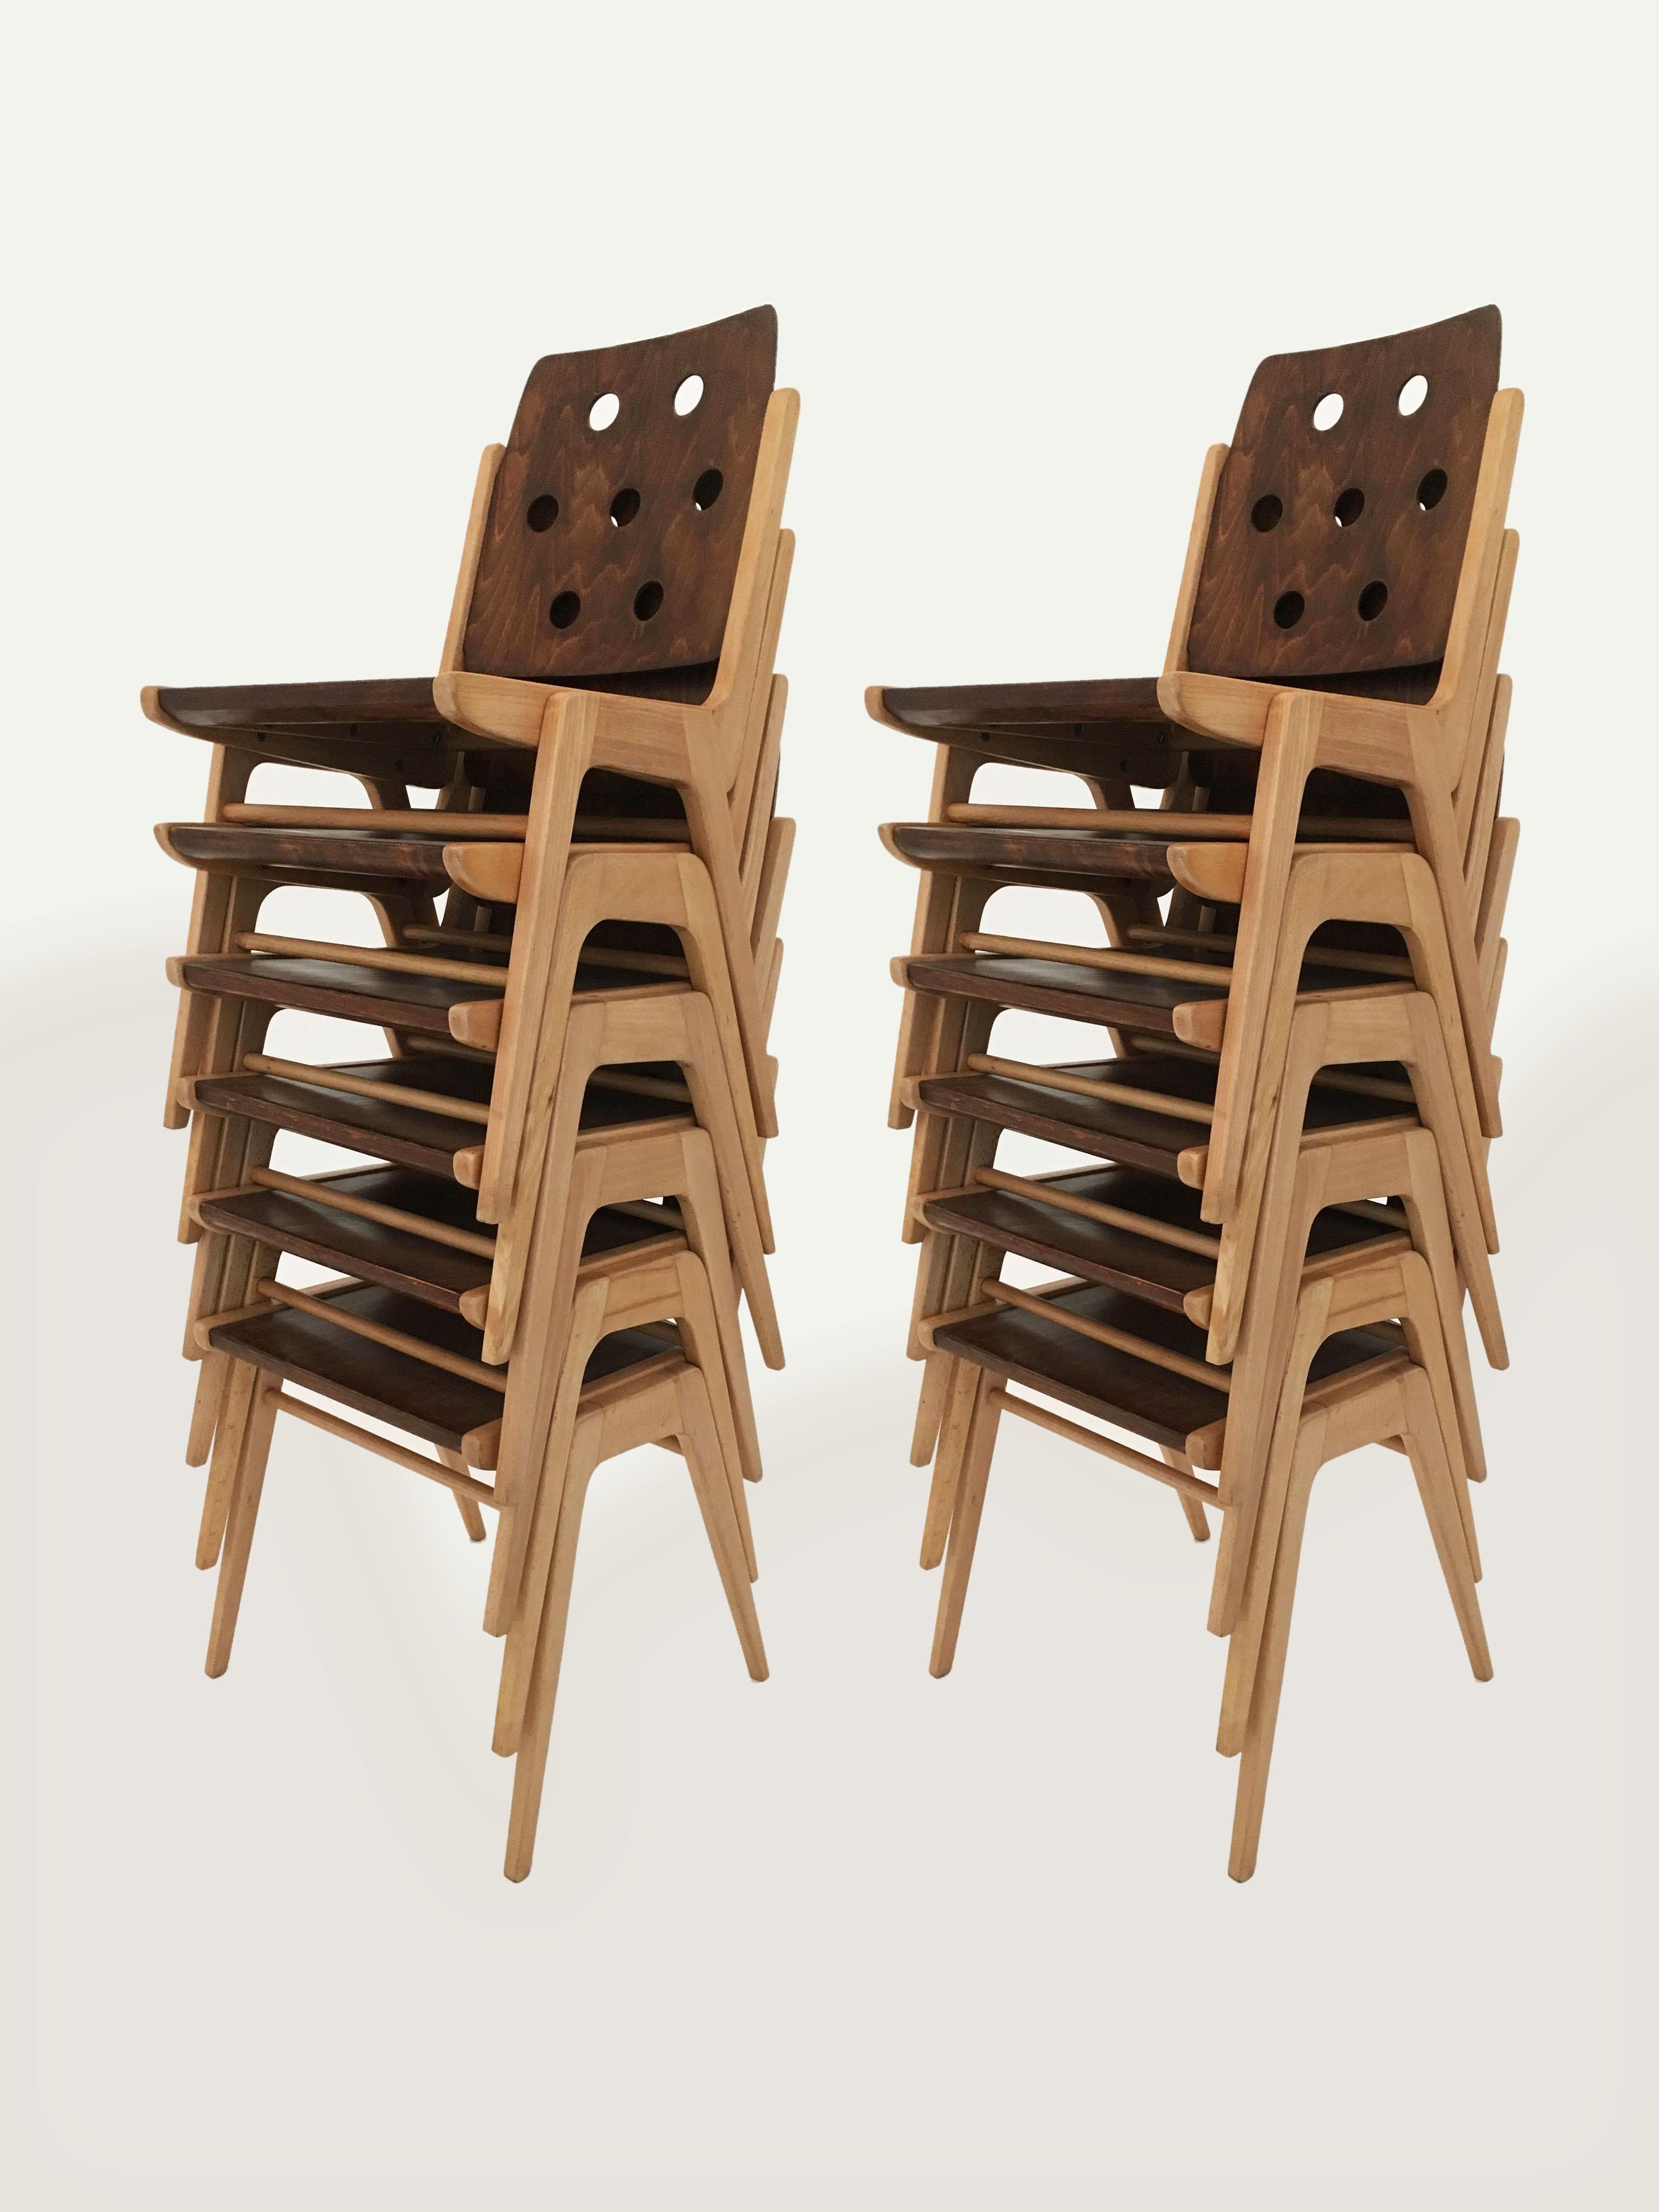 Delightful set of twelve (12) duo-colored stacking dining chairs designed by Austrian architect Franz Schuster, Austria, 1950s. On first sight the design appears to be similar to the famous Roland Rainer Stadthallen chair, although it is quite